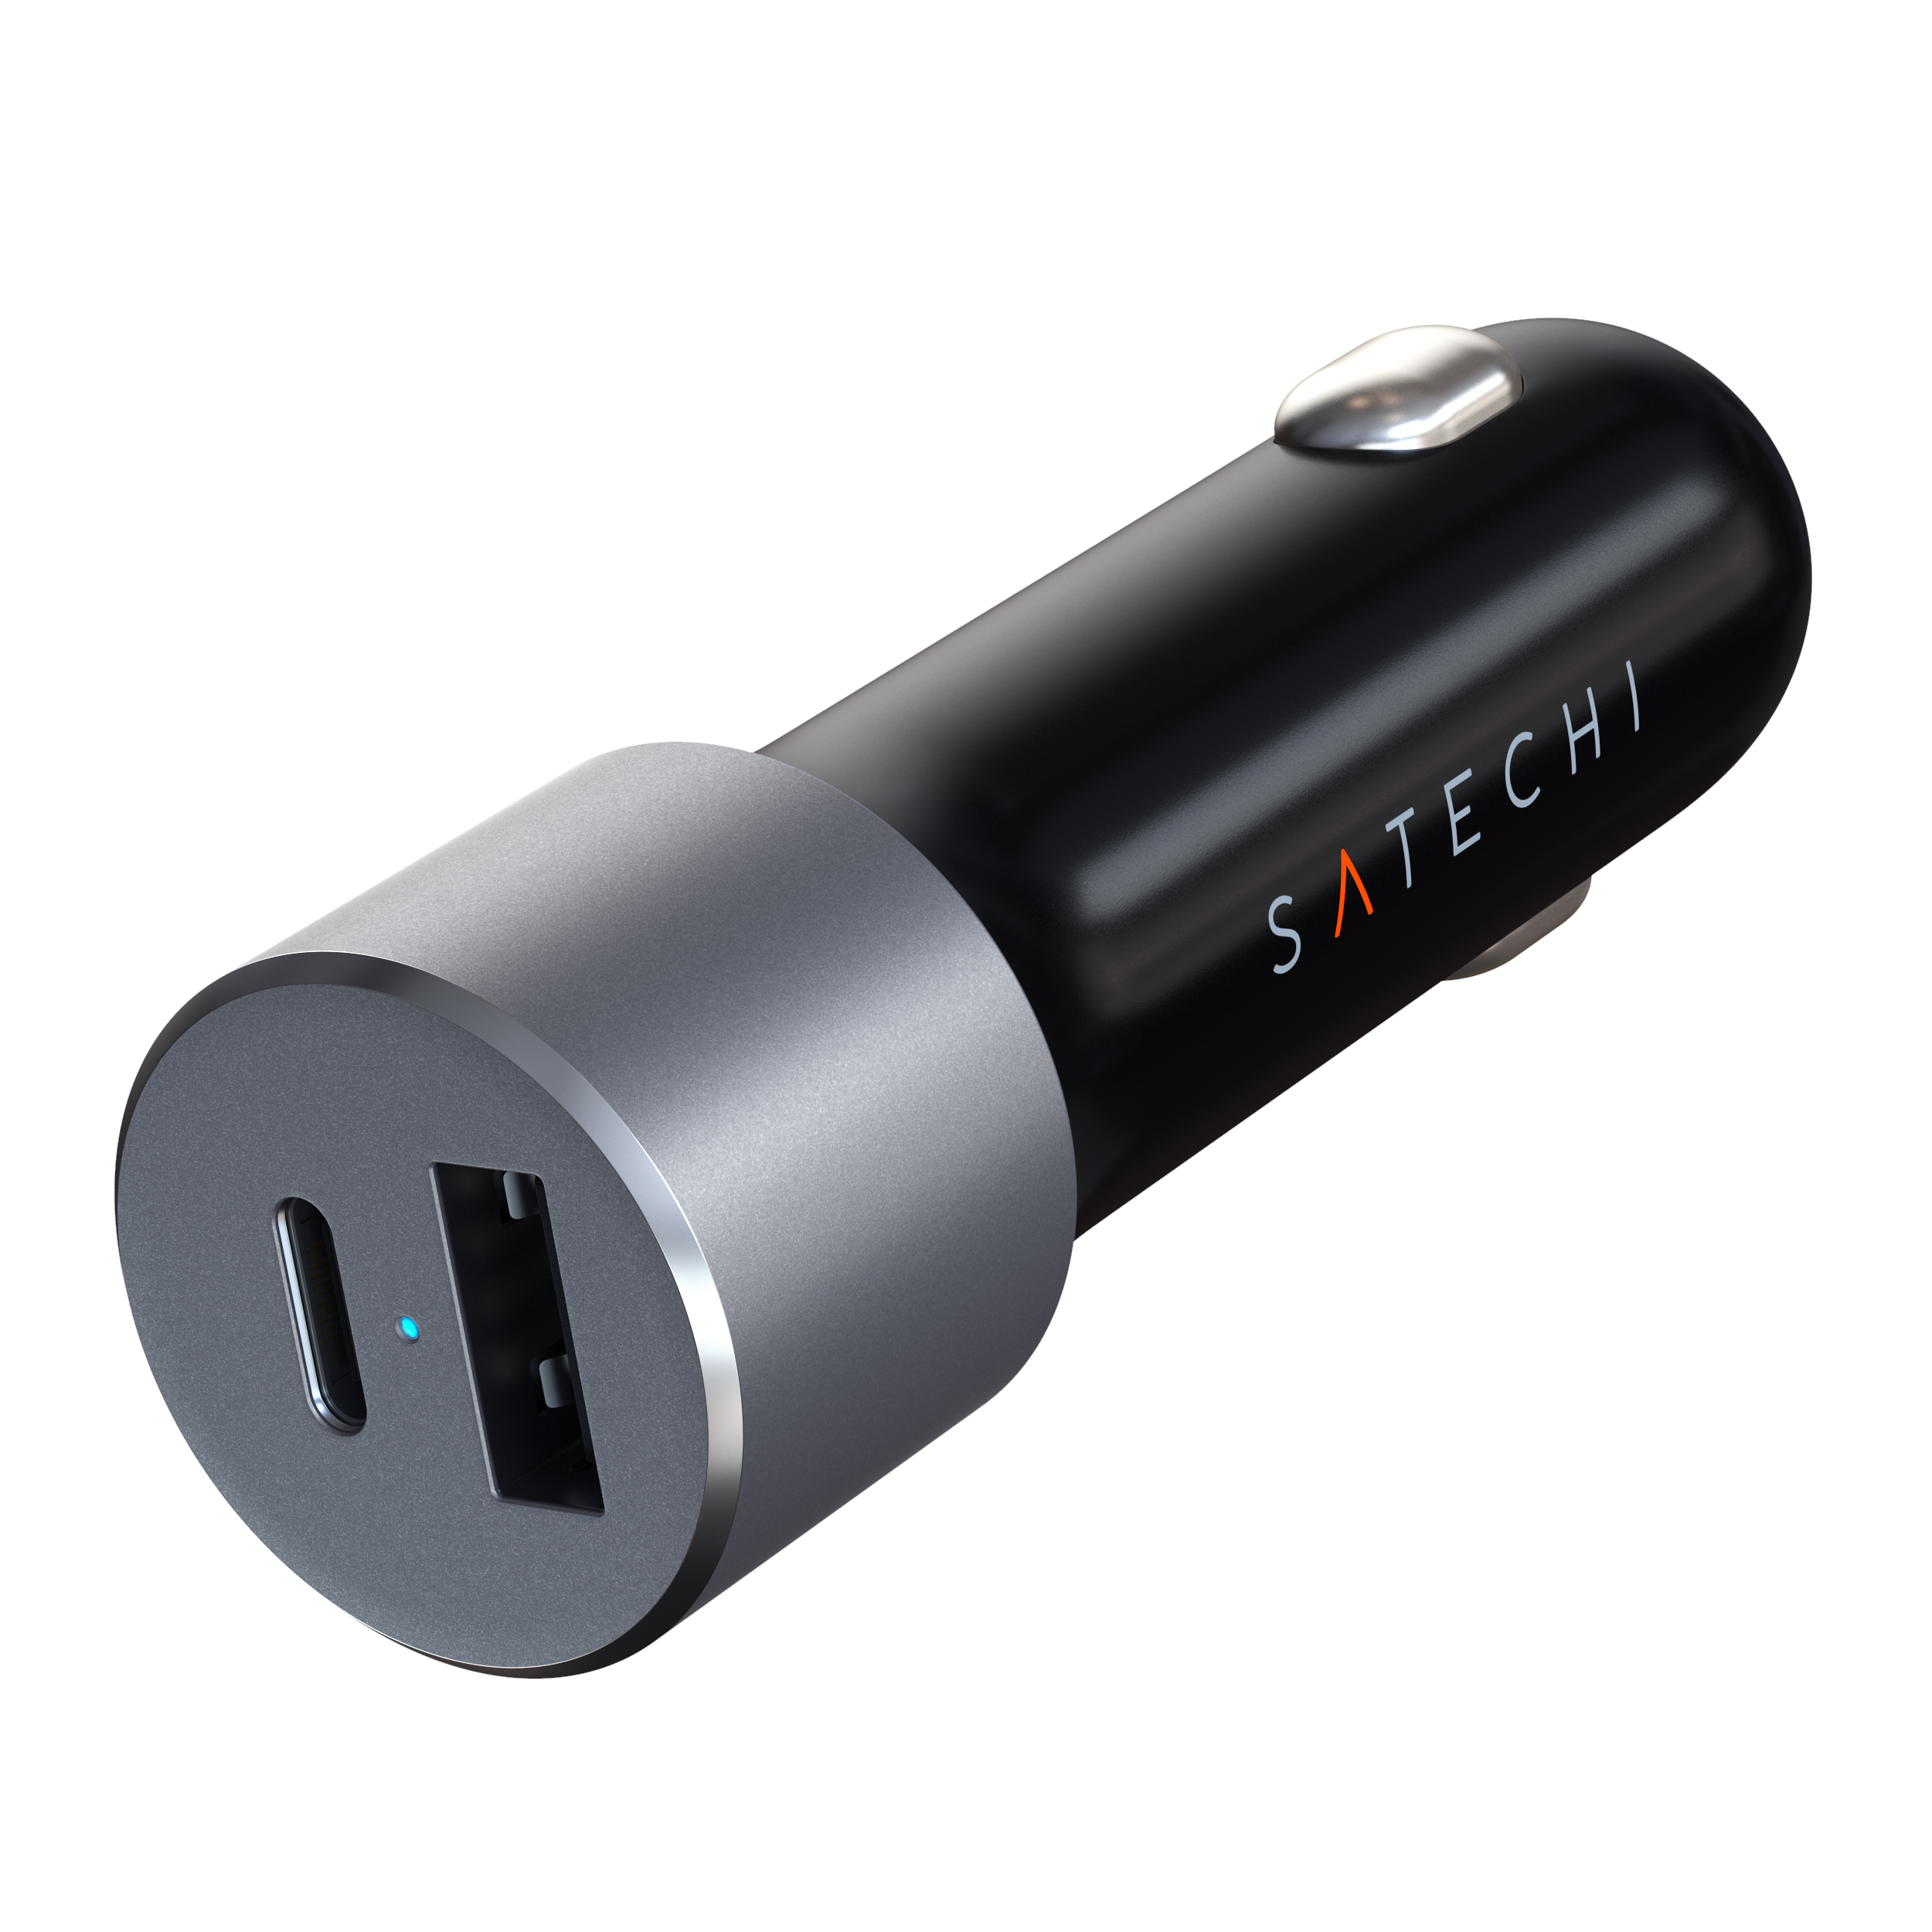 SATECHI 72W Type-C Adapter Charger Satechi, Chargers 12-24 PD Car Grigio Volt